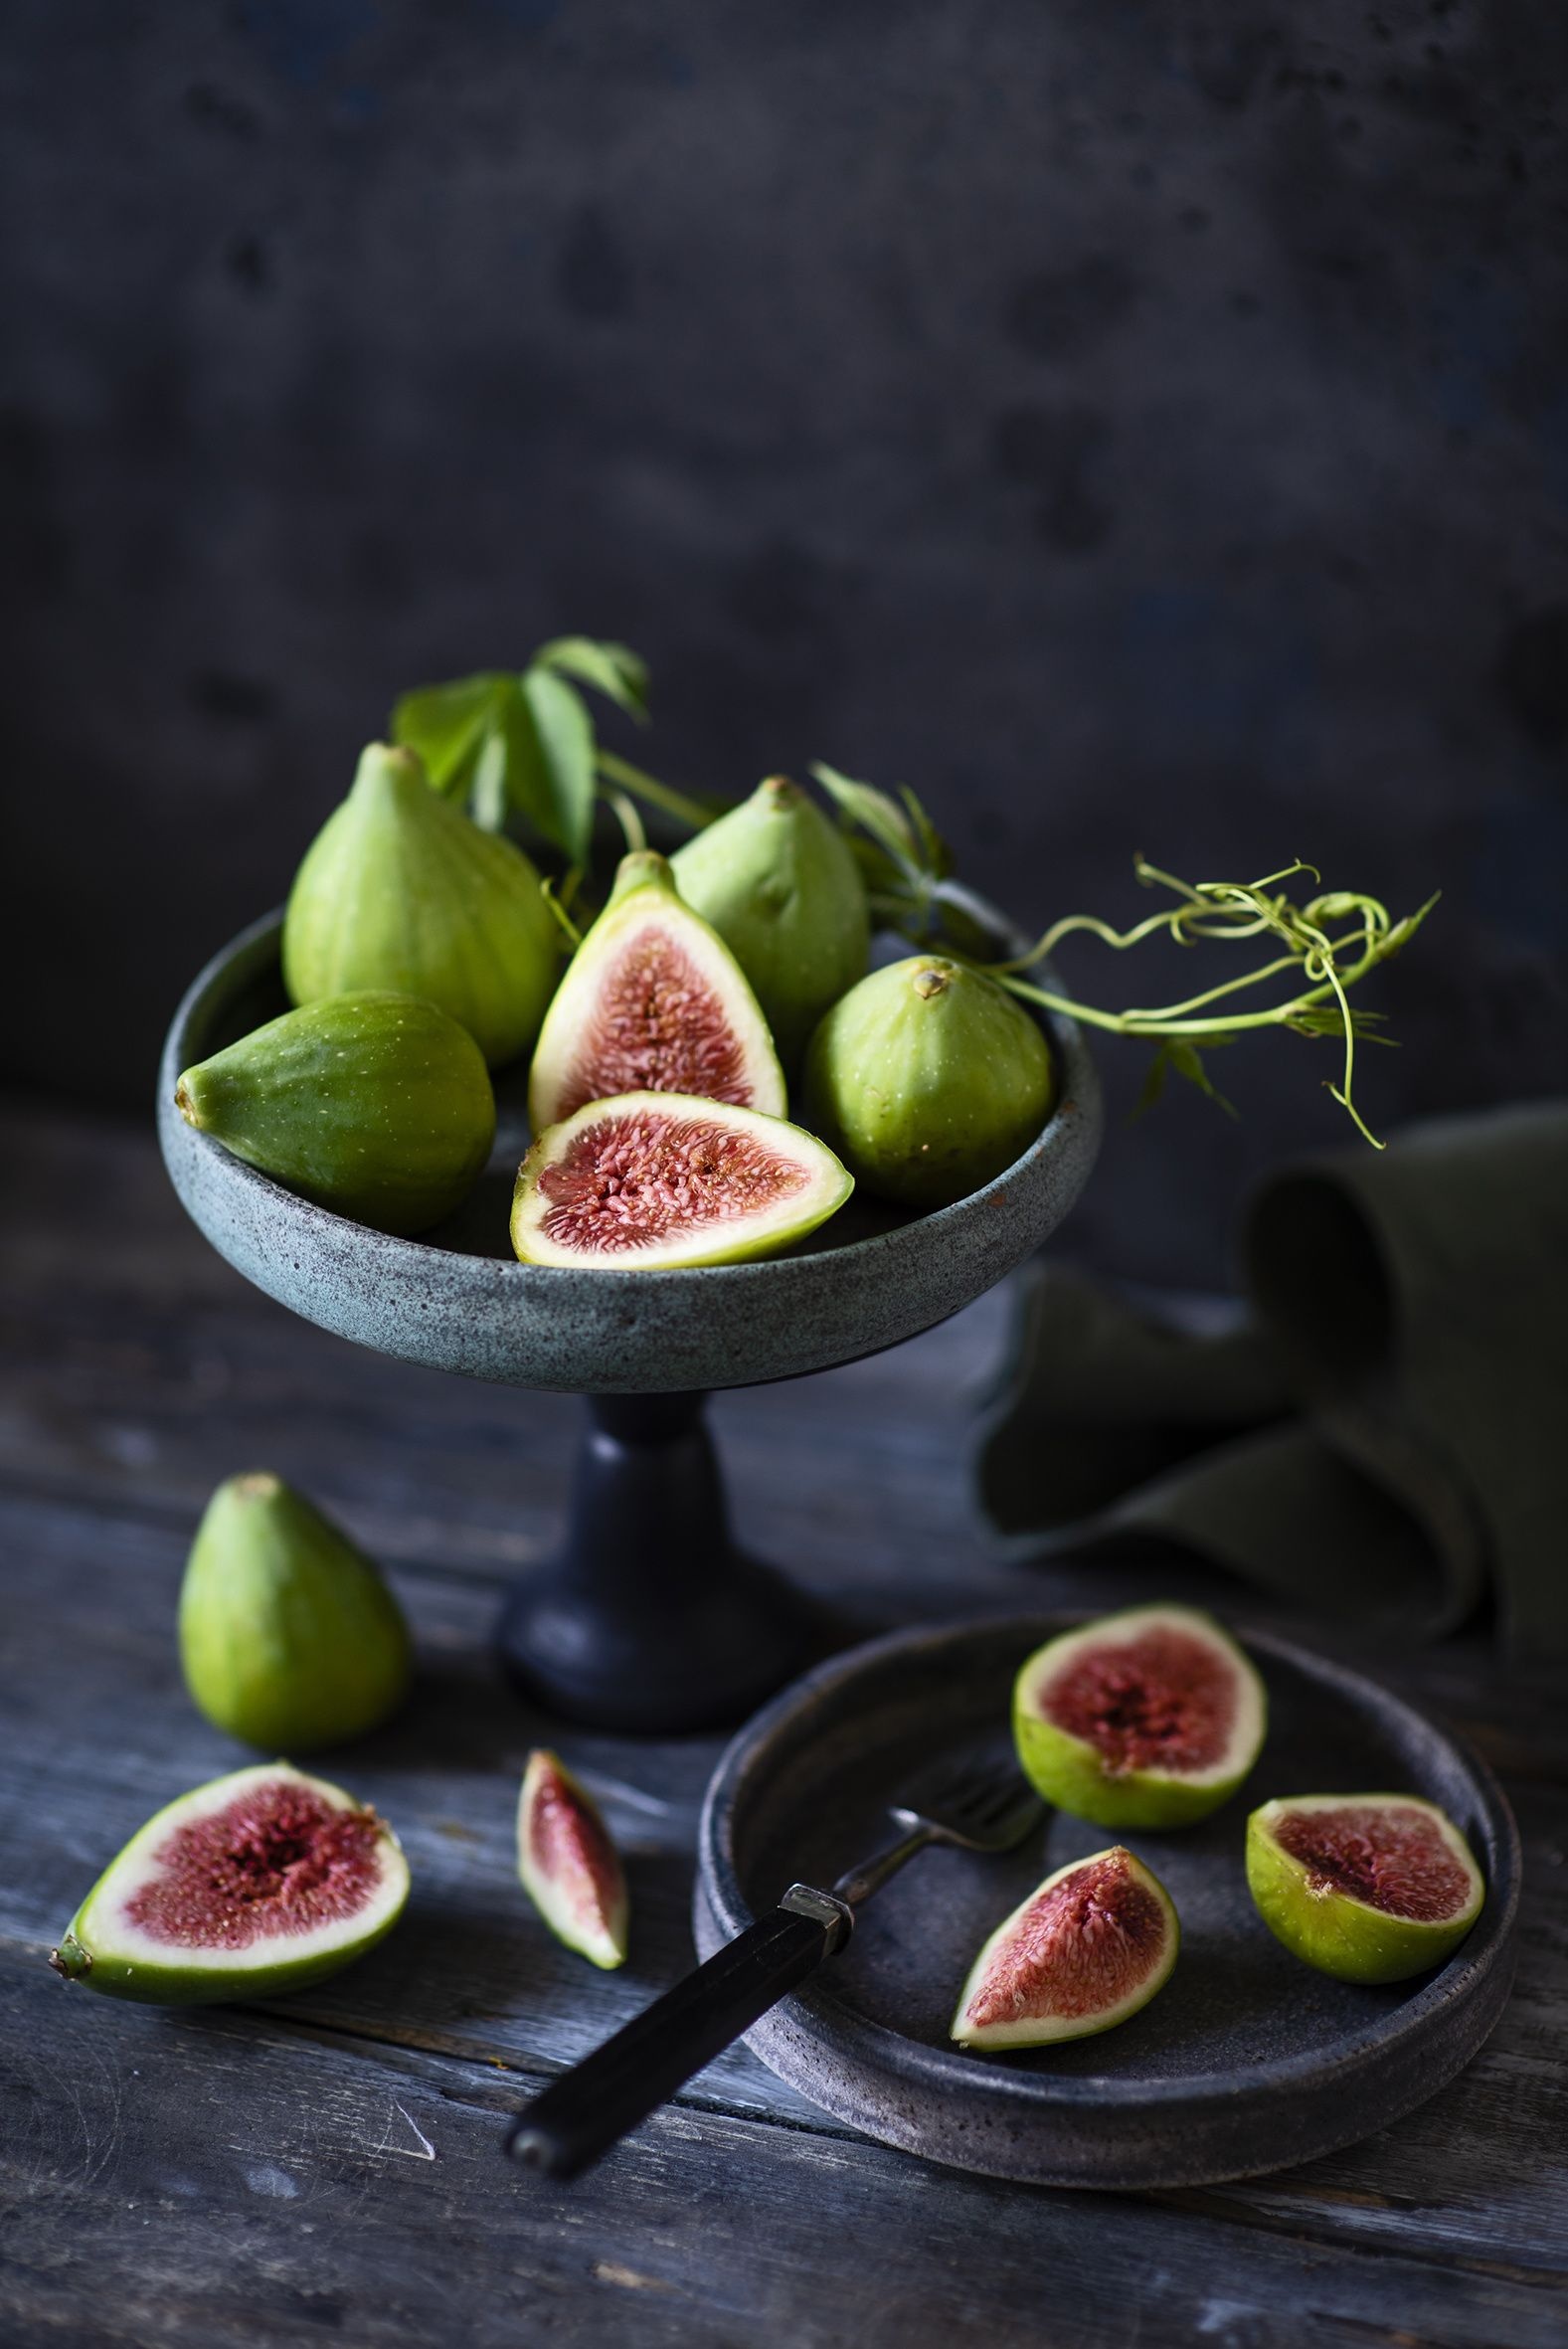 Fig: Contains chemicals that might help control blood sugar and cholesterol levels. 1580x2370 HD Wallpaper.